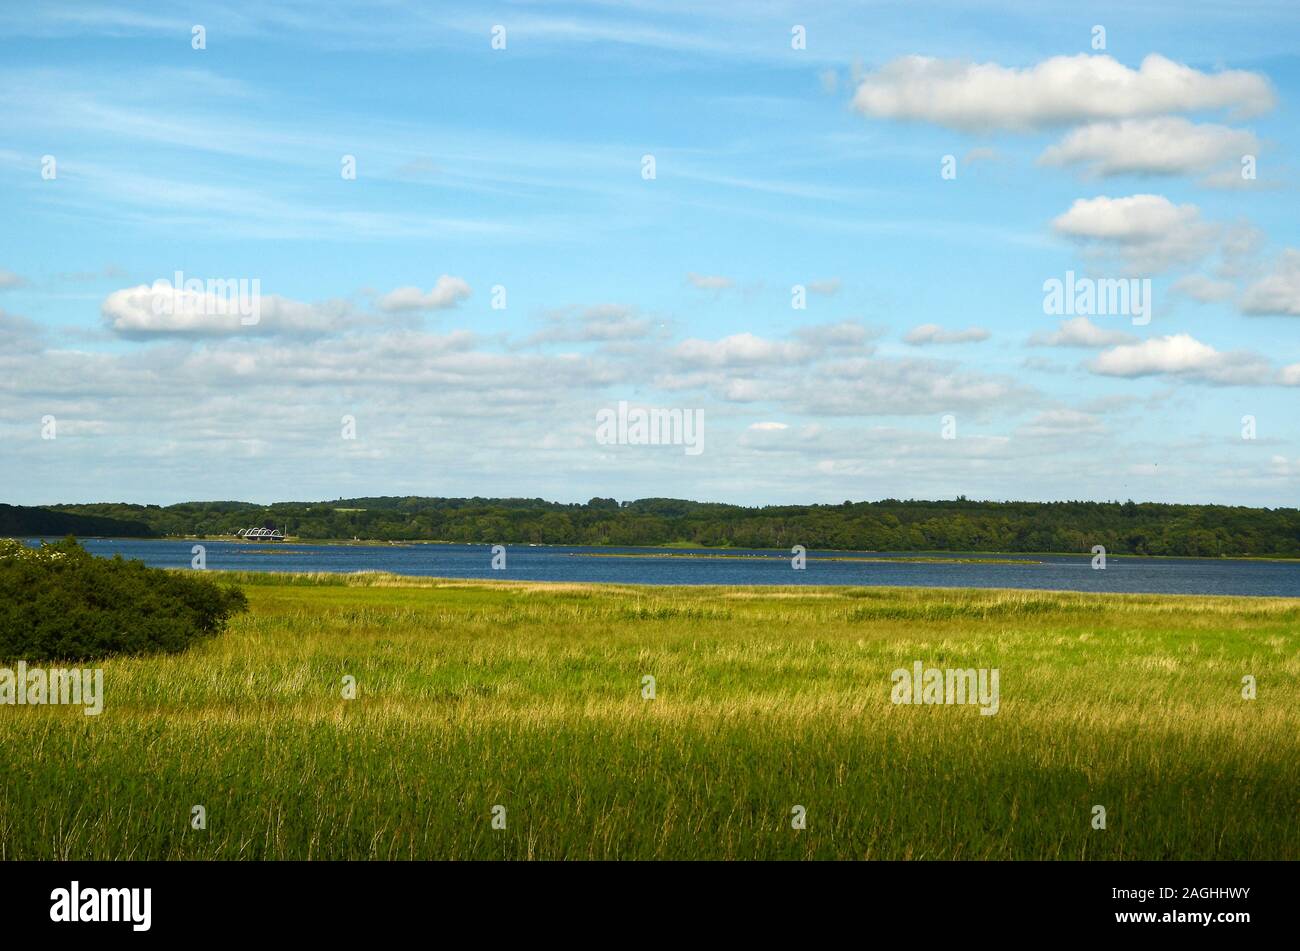 Landscape in Tempelkrog.Sjaelland.Denmark. Holbaek municipality overlooking the Munkholm Bridge on the other shore. Vipperod locality in the Isefjord. Stock Photo